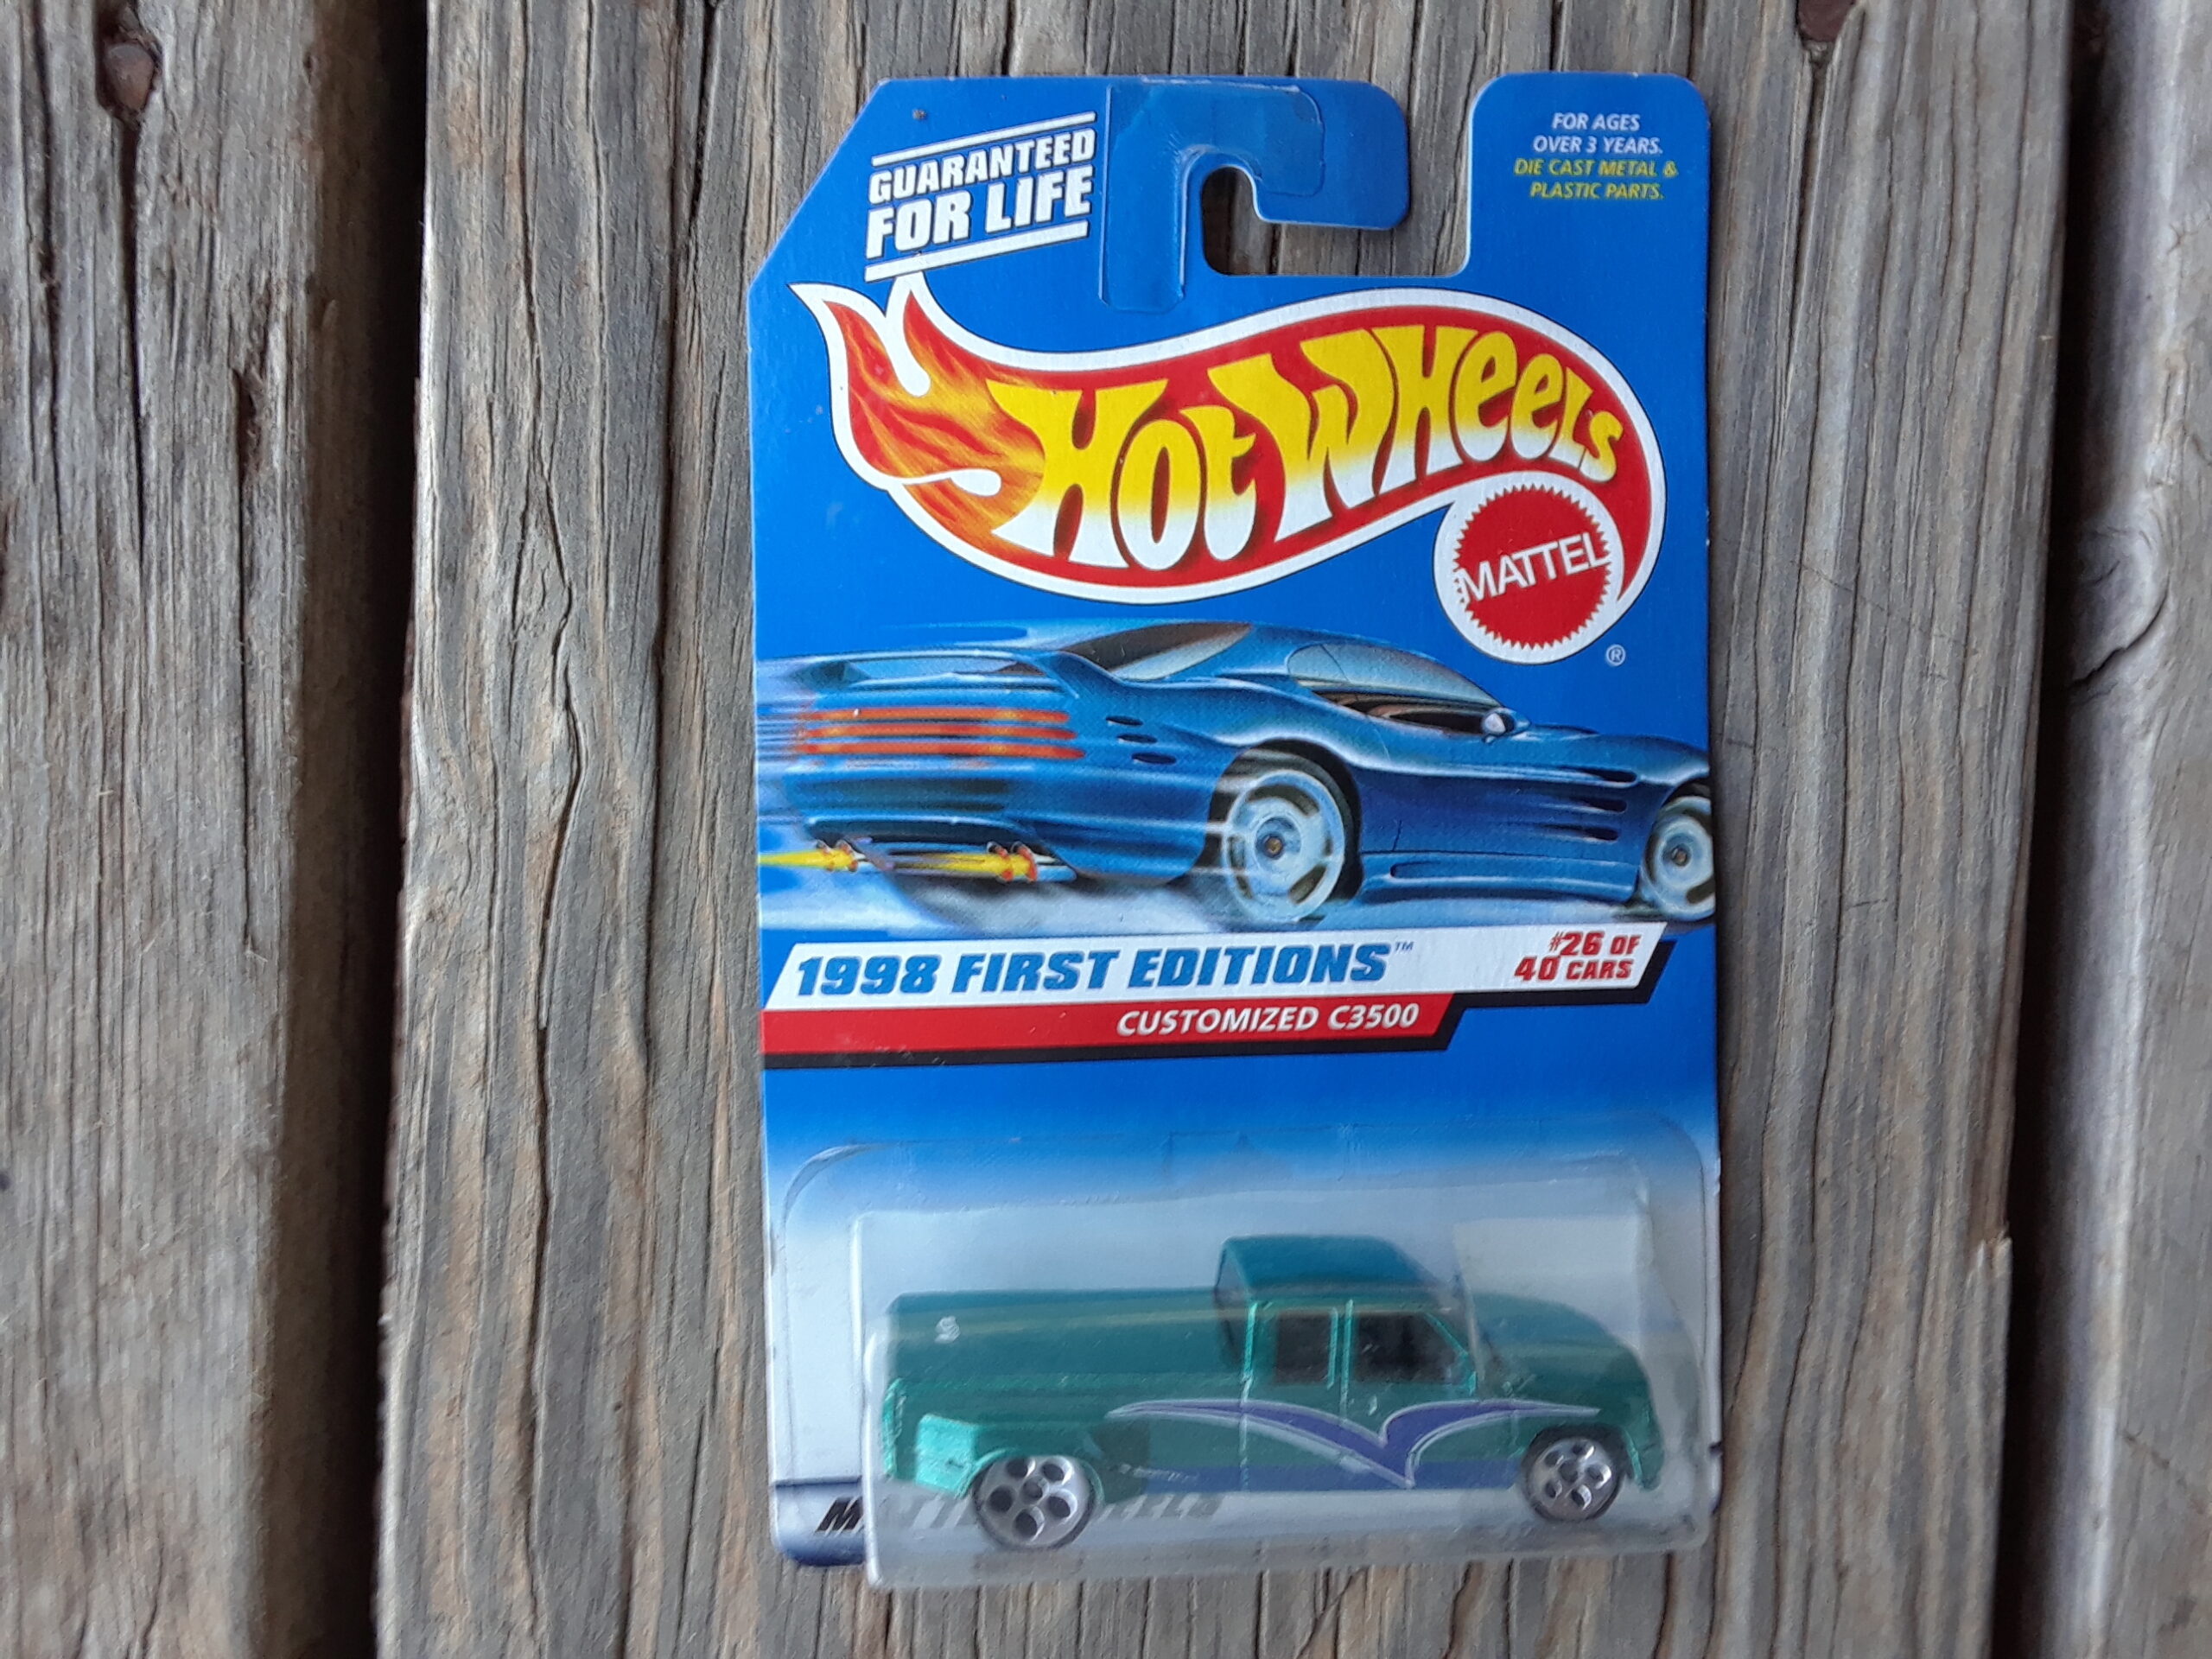 Hot Wheels 1998 First Editions Customized C3500